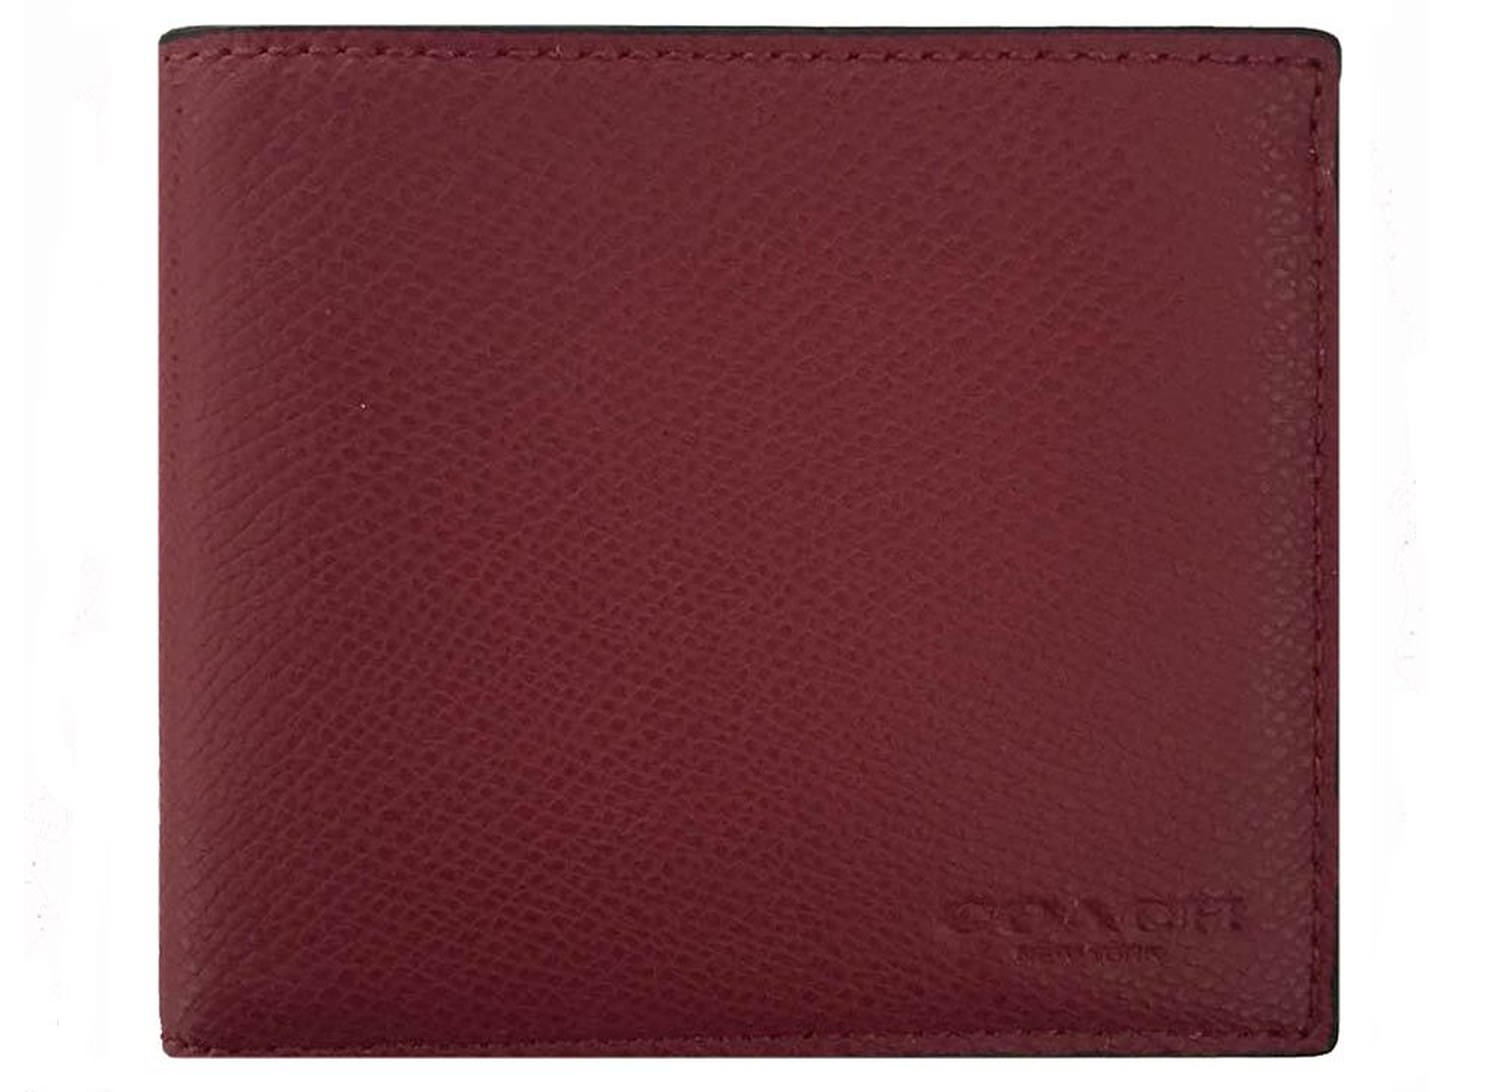 black cherry leather wallet